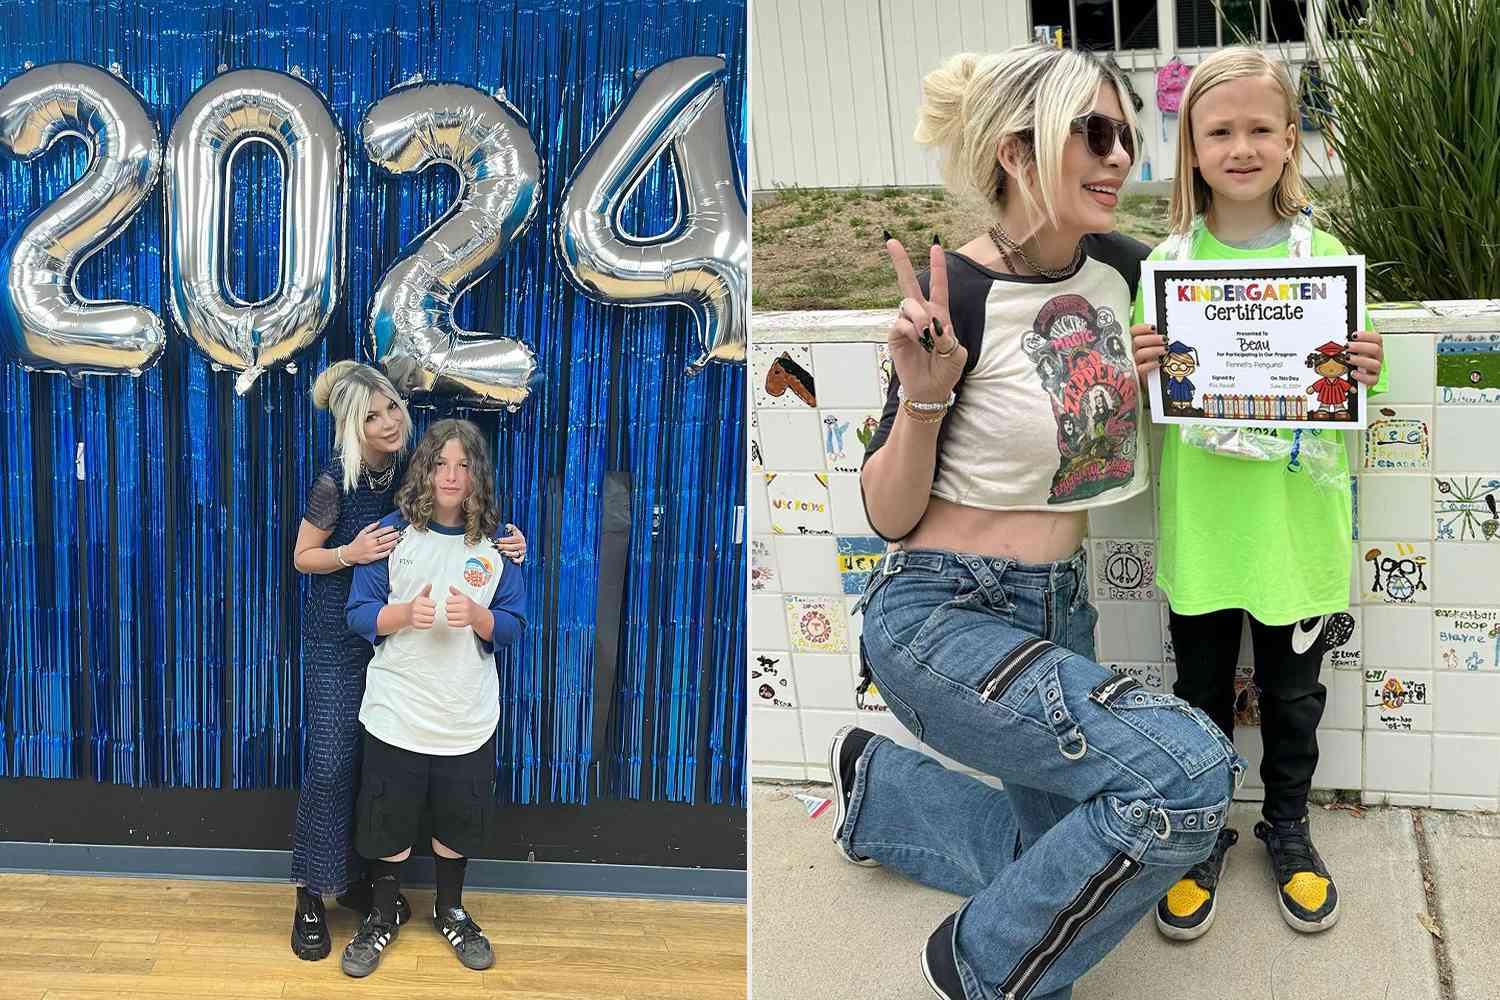 Tori Spelling's Son Graduates from Elementary School as She Defends His Choice to Wear Shorts to Ceremony